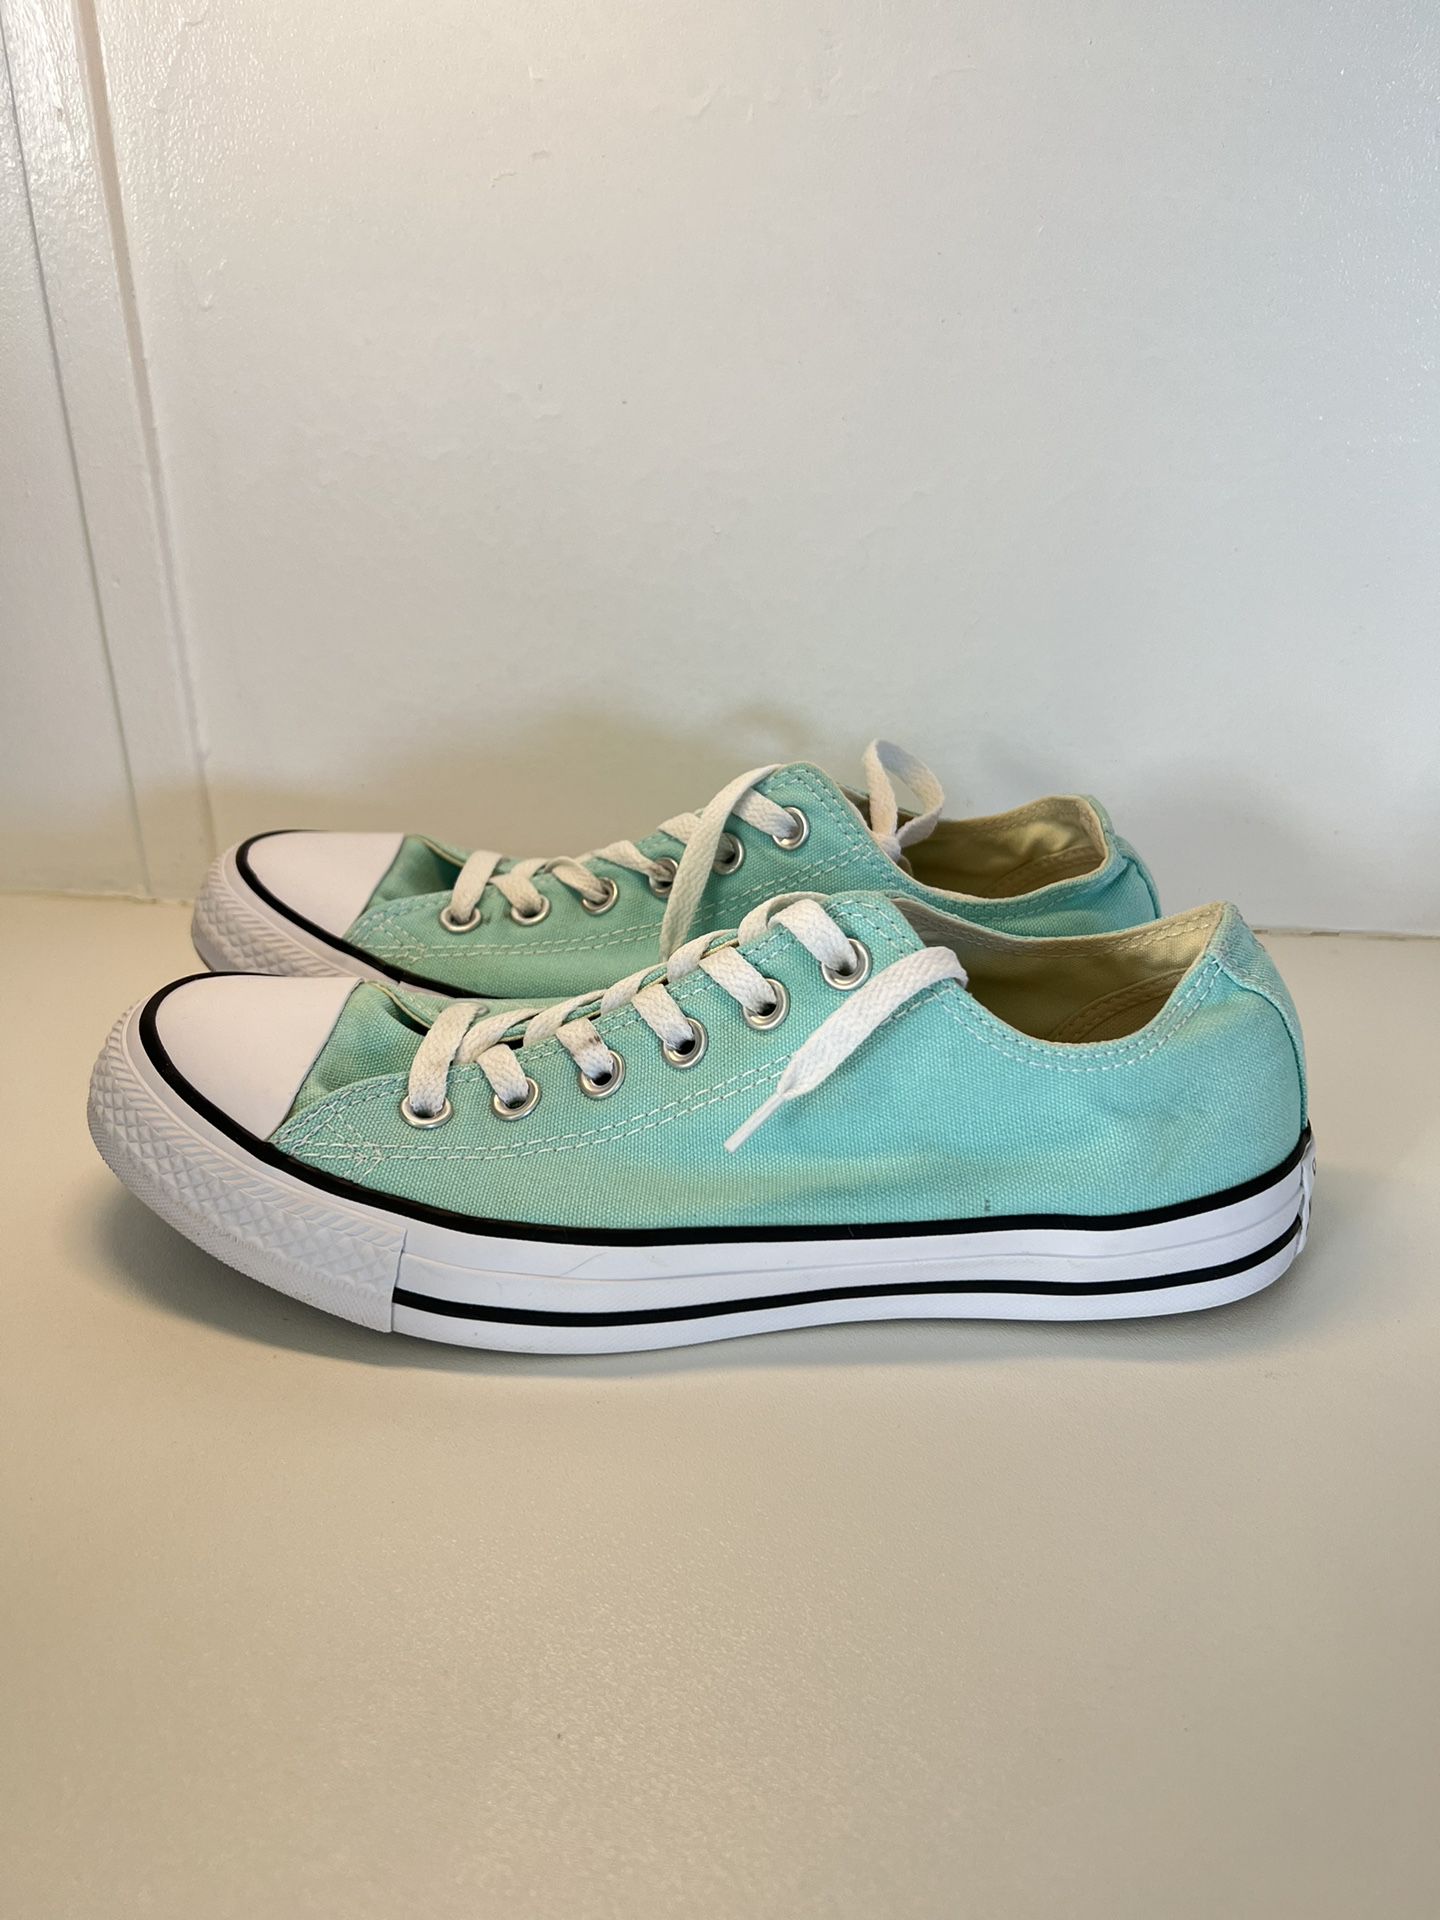 Converse Chuck Taylor All-Star Low Top Mint Men’s Size 7 Women’s  9  Sneakers